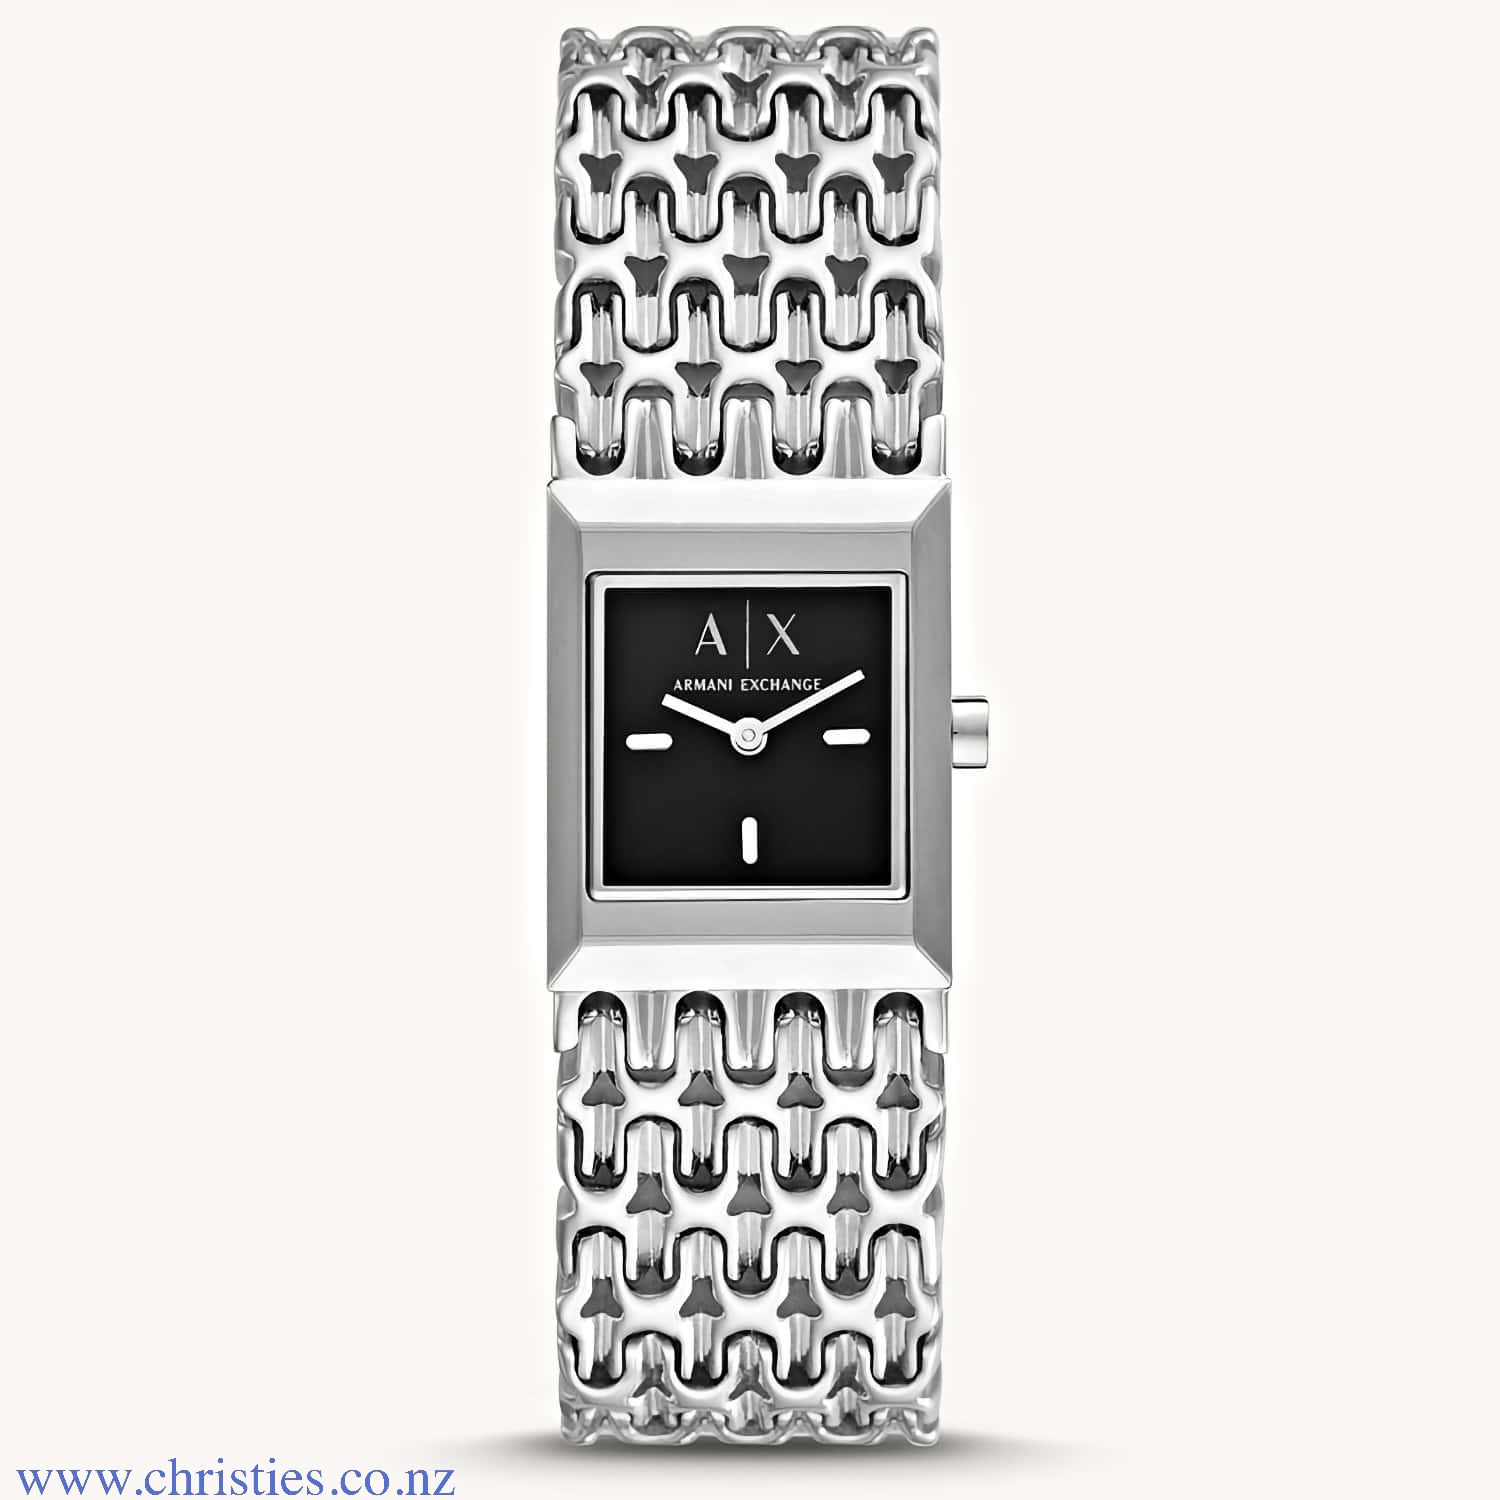 AX5908 A|X Armani Exchange Ladies Stainless Steel Watch. AX5908 A|X Armani Exchange Ladies Stainless Steel Watch   LAYBUY - Pay it easy, in 6 weekly payments and have it now. Only pay the price of your purchase, when you pay your instalments on time. A la